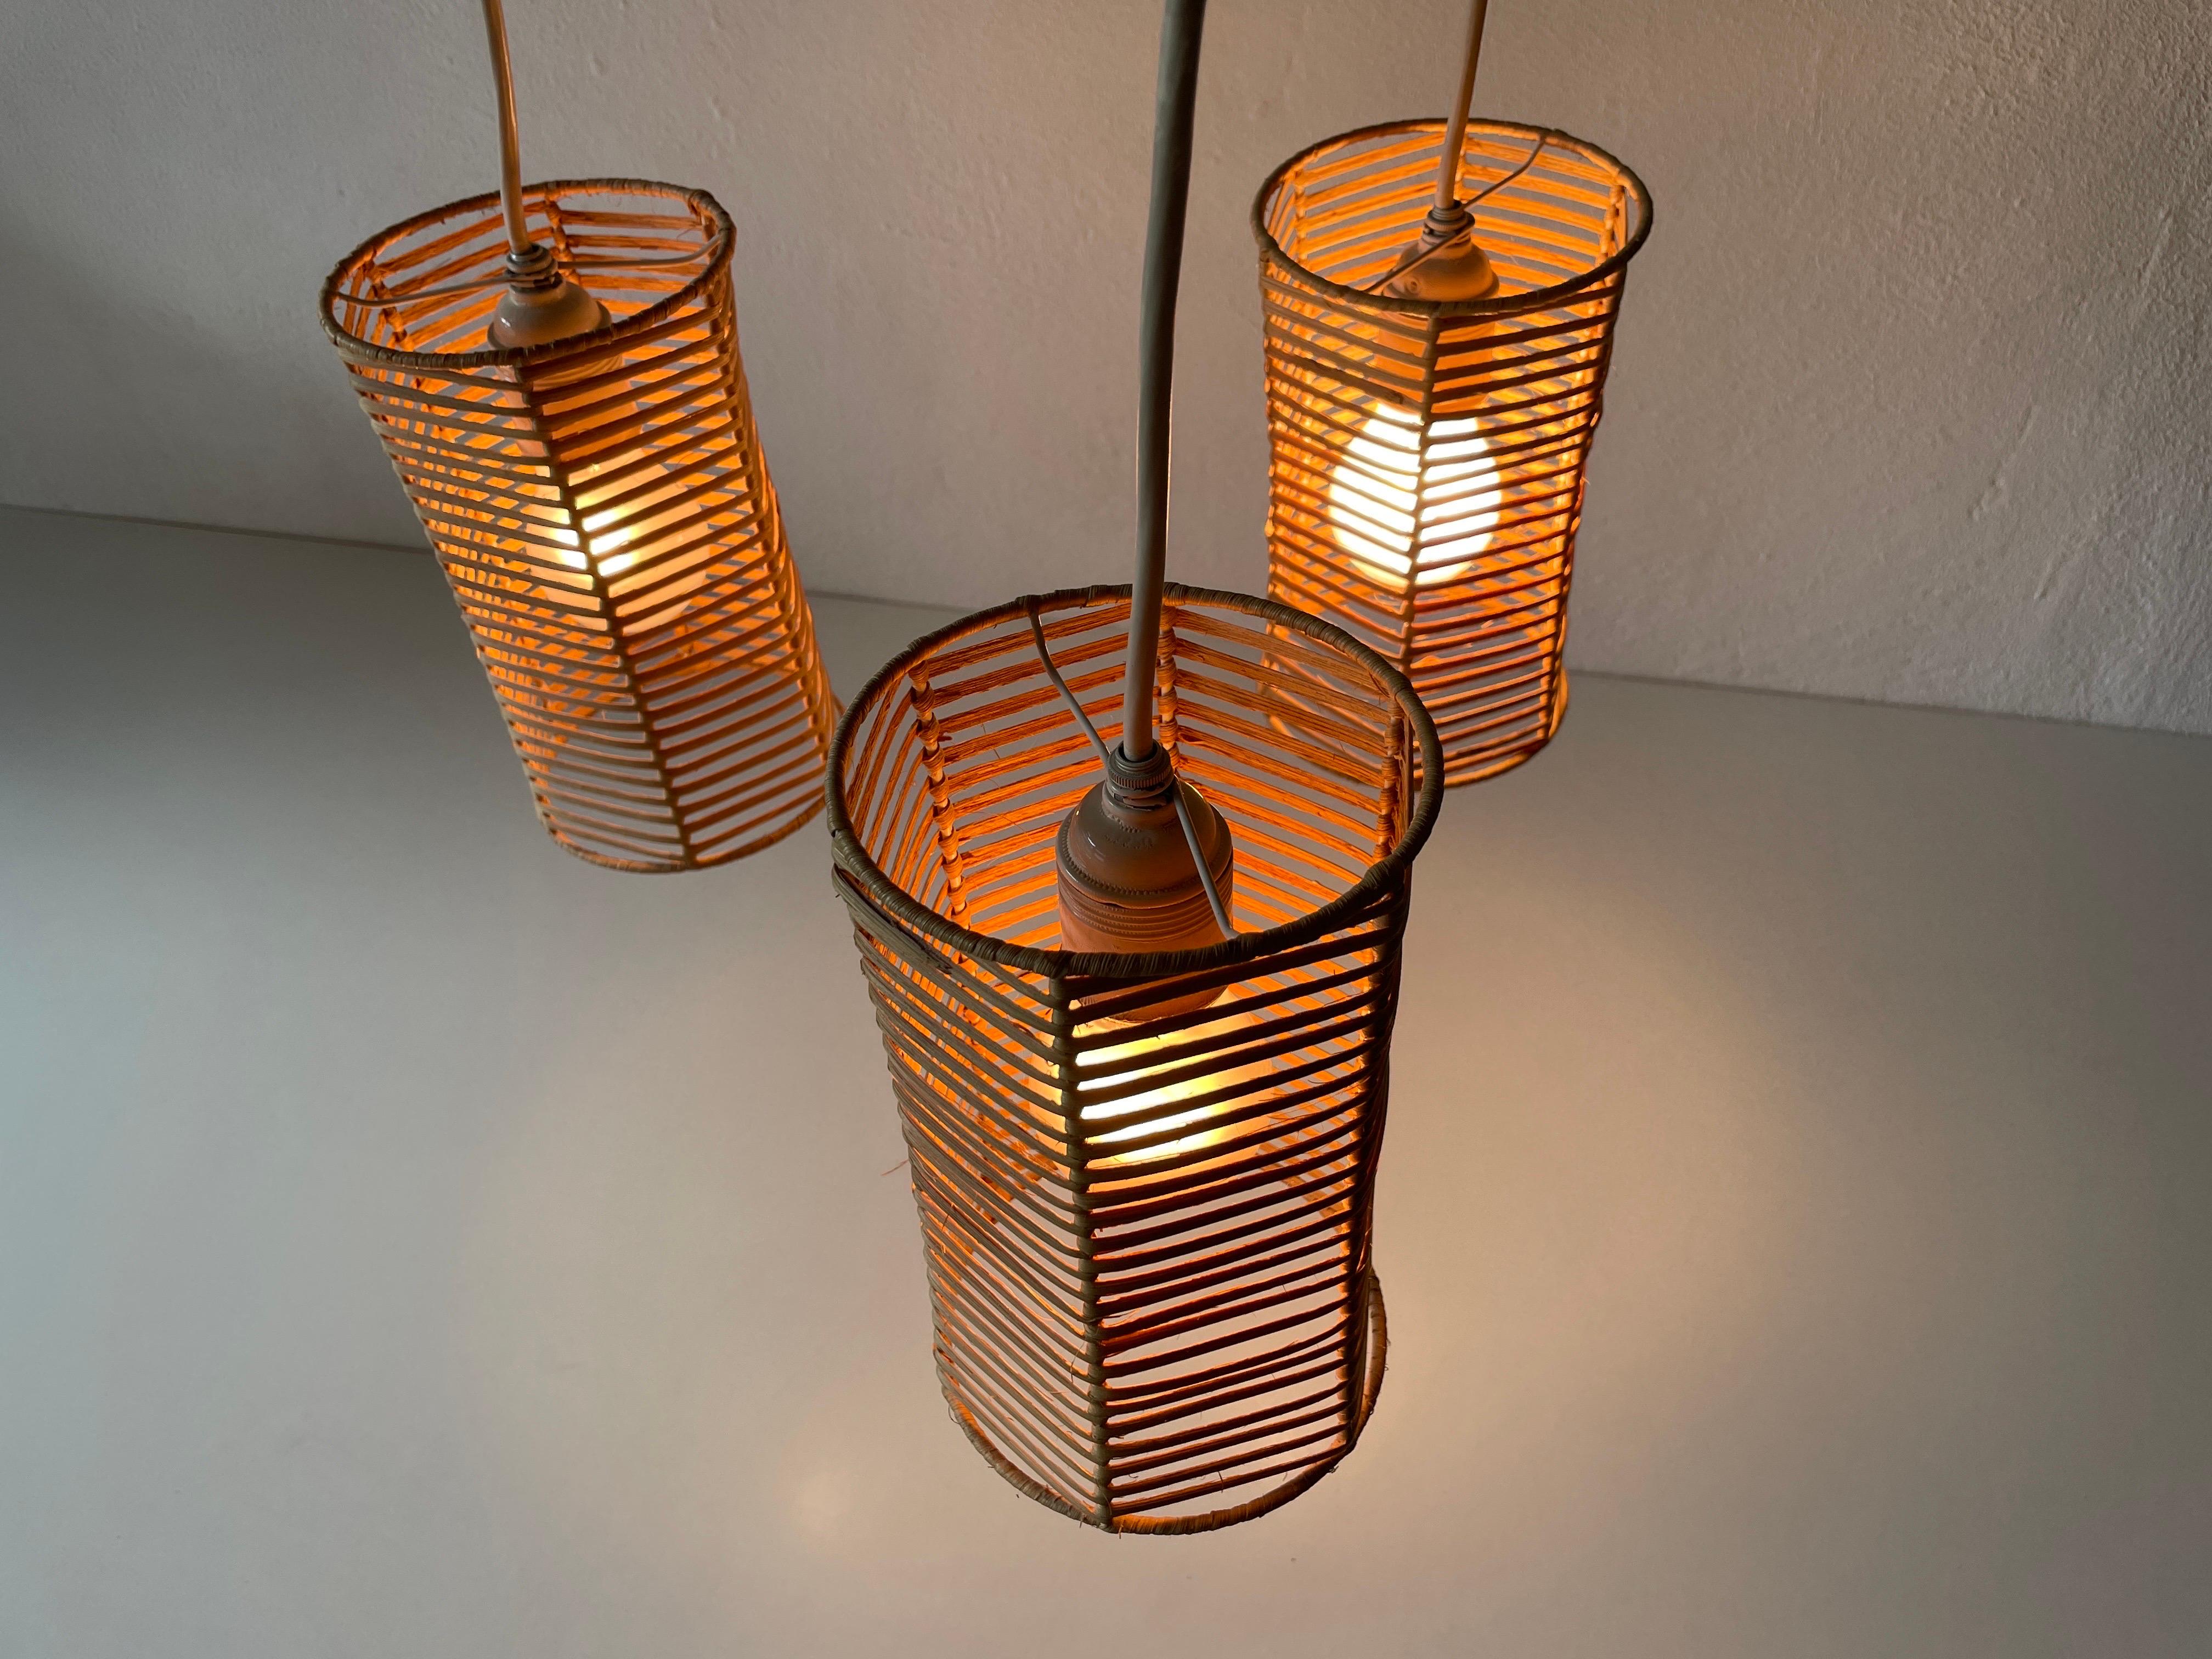 Triple Shade Wicker and Wood Pendant Lamp, 1960s, Germany For Sale 7